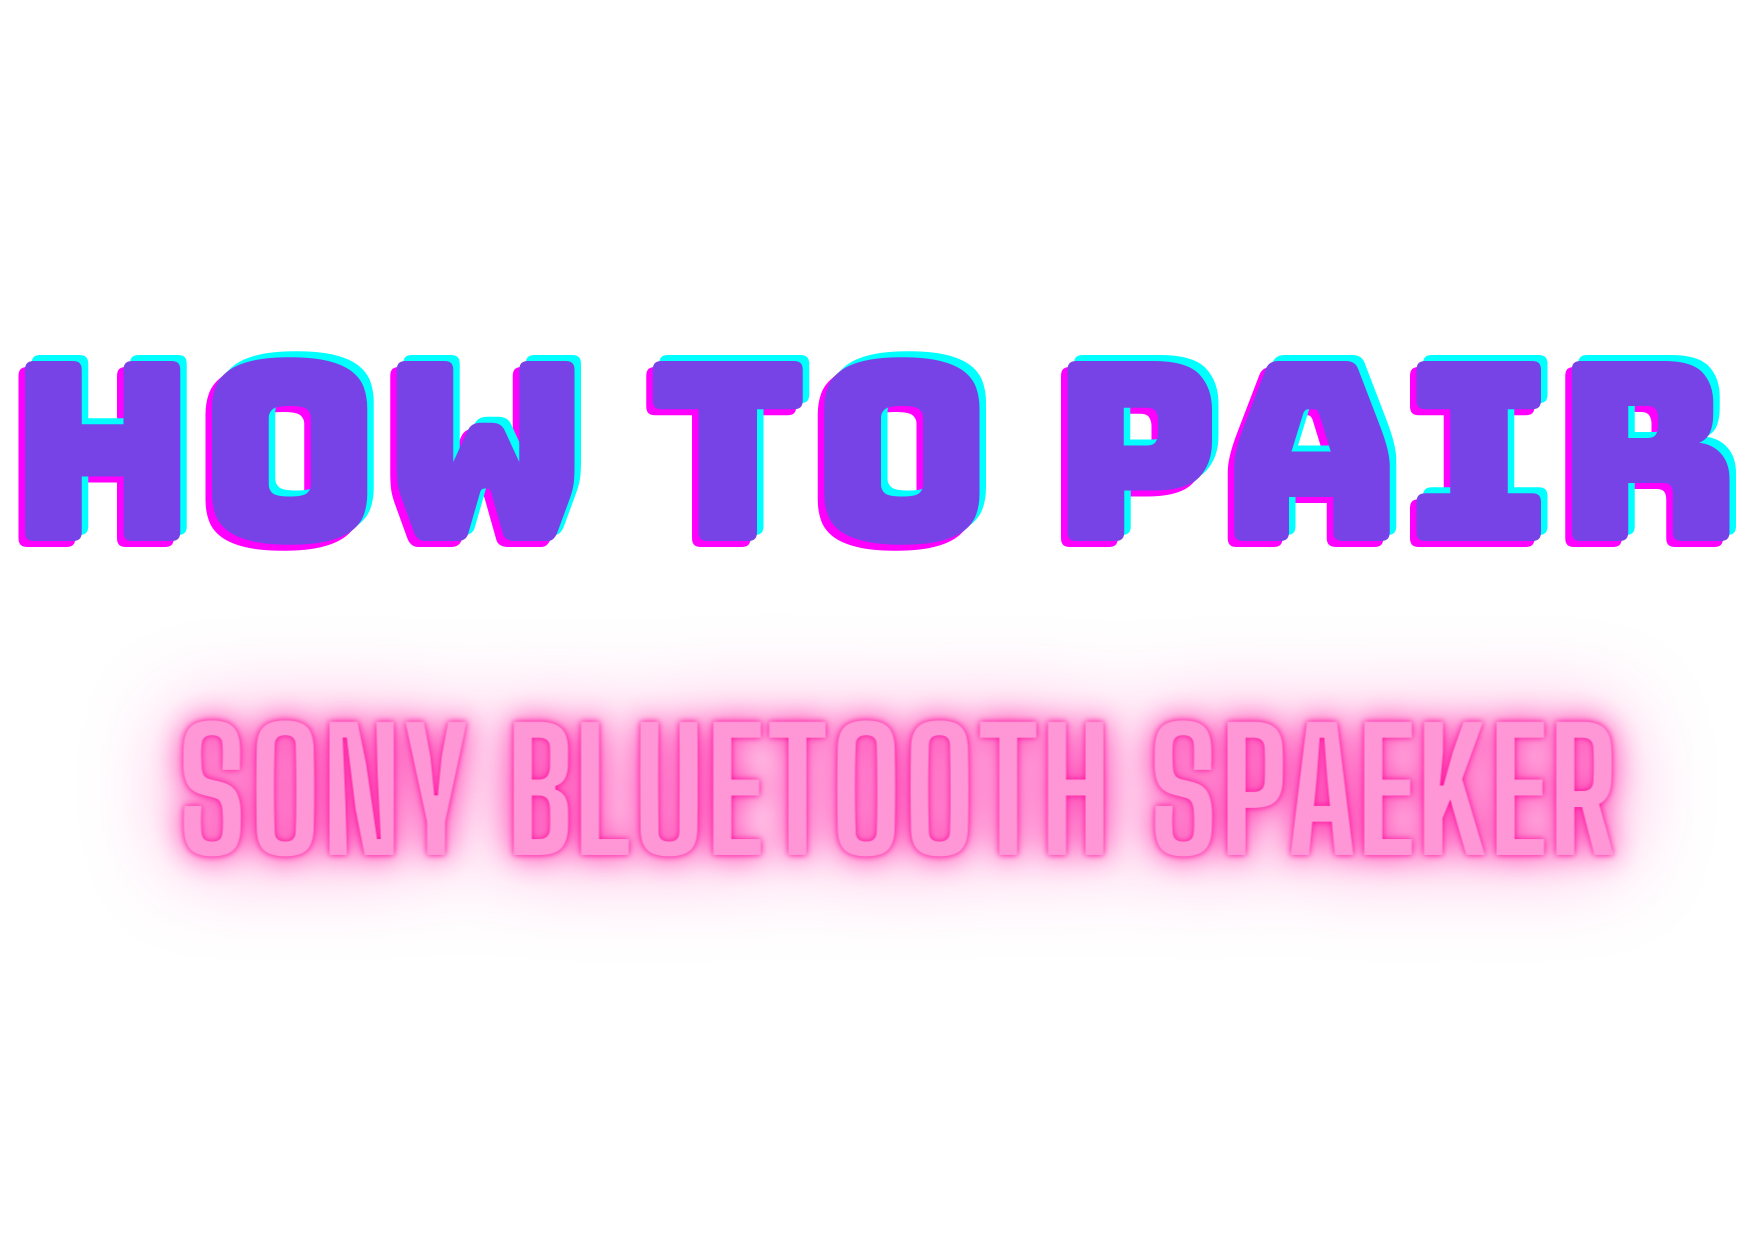 How to pair sony Bluetooth speaker